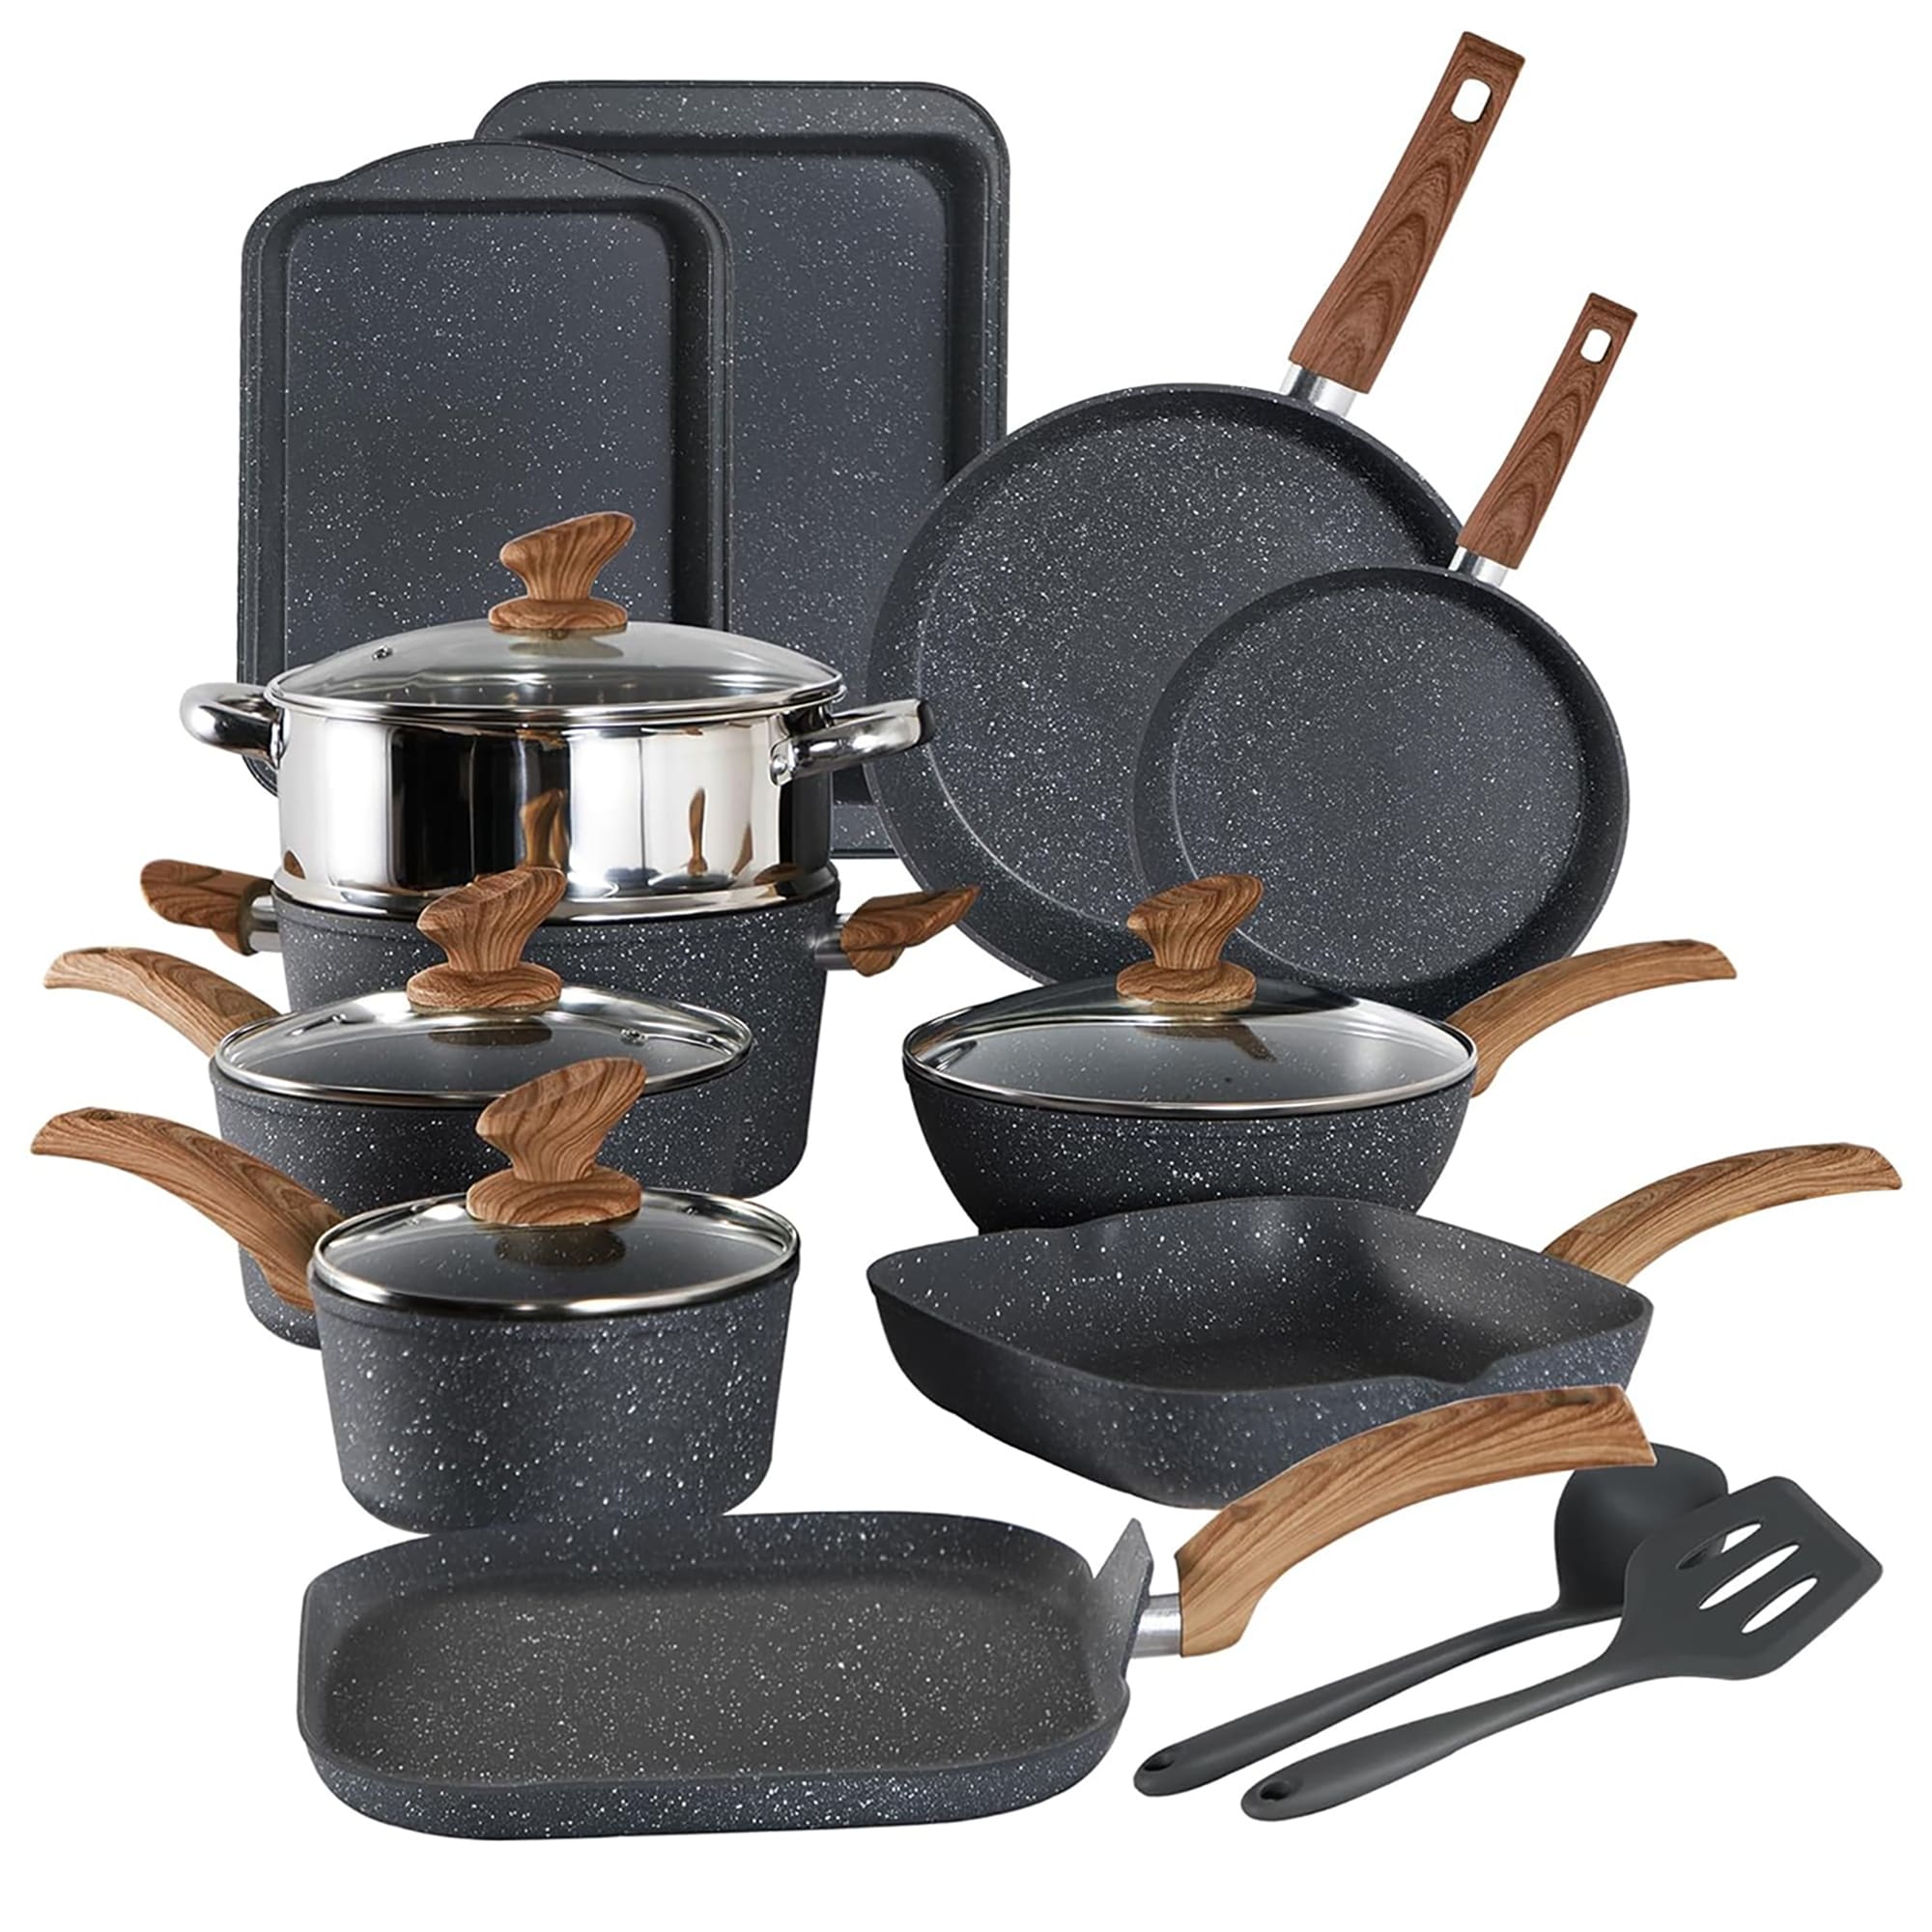 https://ak1.ostkcdn.com/images/products/is/images/direct/4e114bdab8cf2b70ee6d48ff8f1e5563cf17c202/17-Piece-Kitchen-Granite-Cookware-Set%2C-Non-stick-Cooking-Pots-and-Pans-Set.jpg